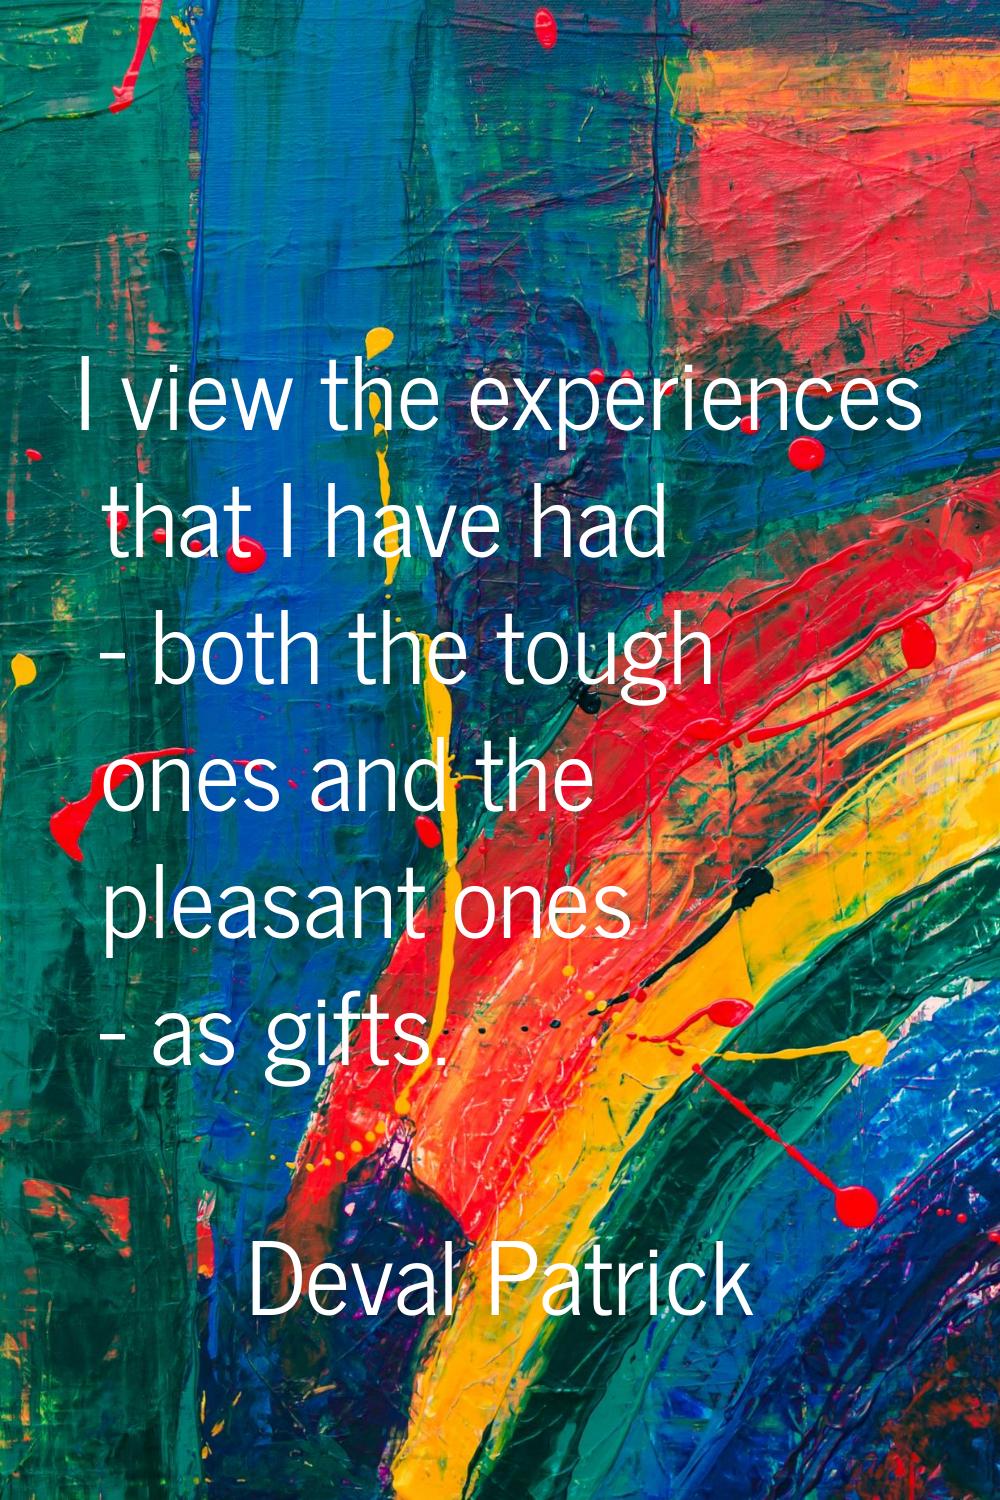 I view the experiences that I have had - both the tough ones and the pleasant ones - as gifts.